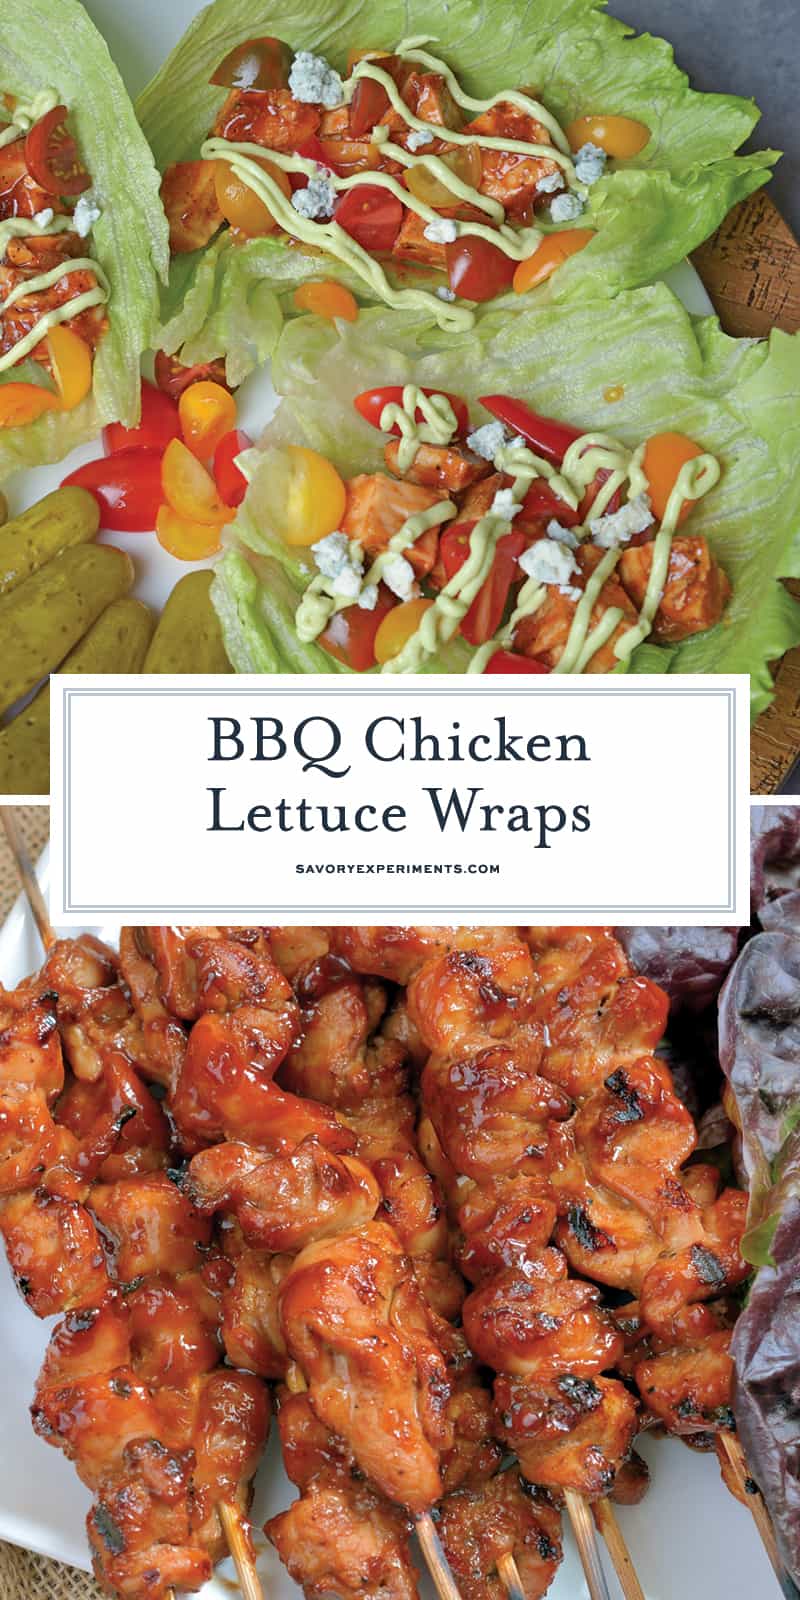 BBQ Chicken Lettuce Wraps use seasoned chicken with your favorite BBQ sauce and wrap them in crispy lettuce with juicy tomatoes, blue cheese and cool avocado dressing. #lettucewraps www.savoryexperiments.com 